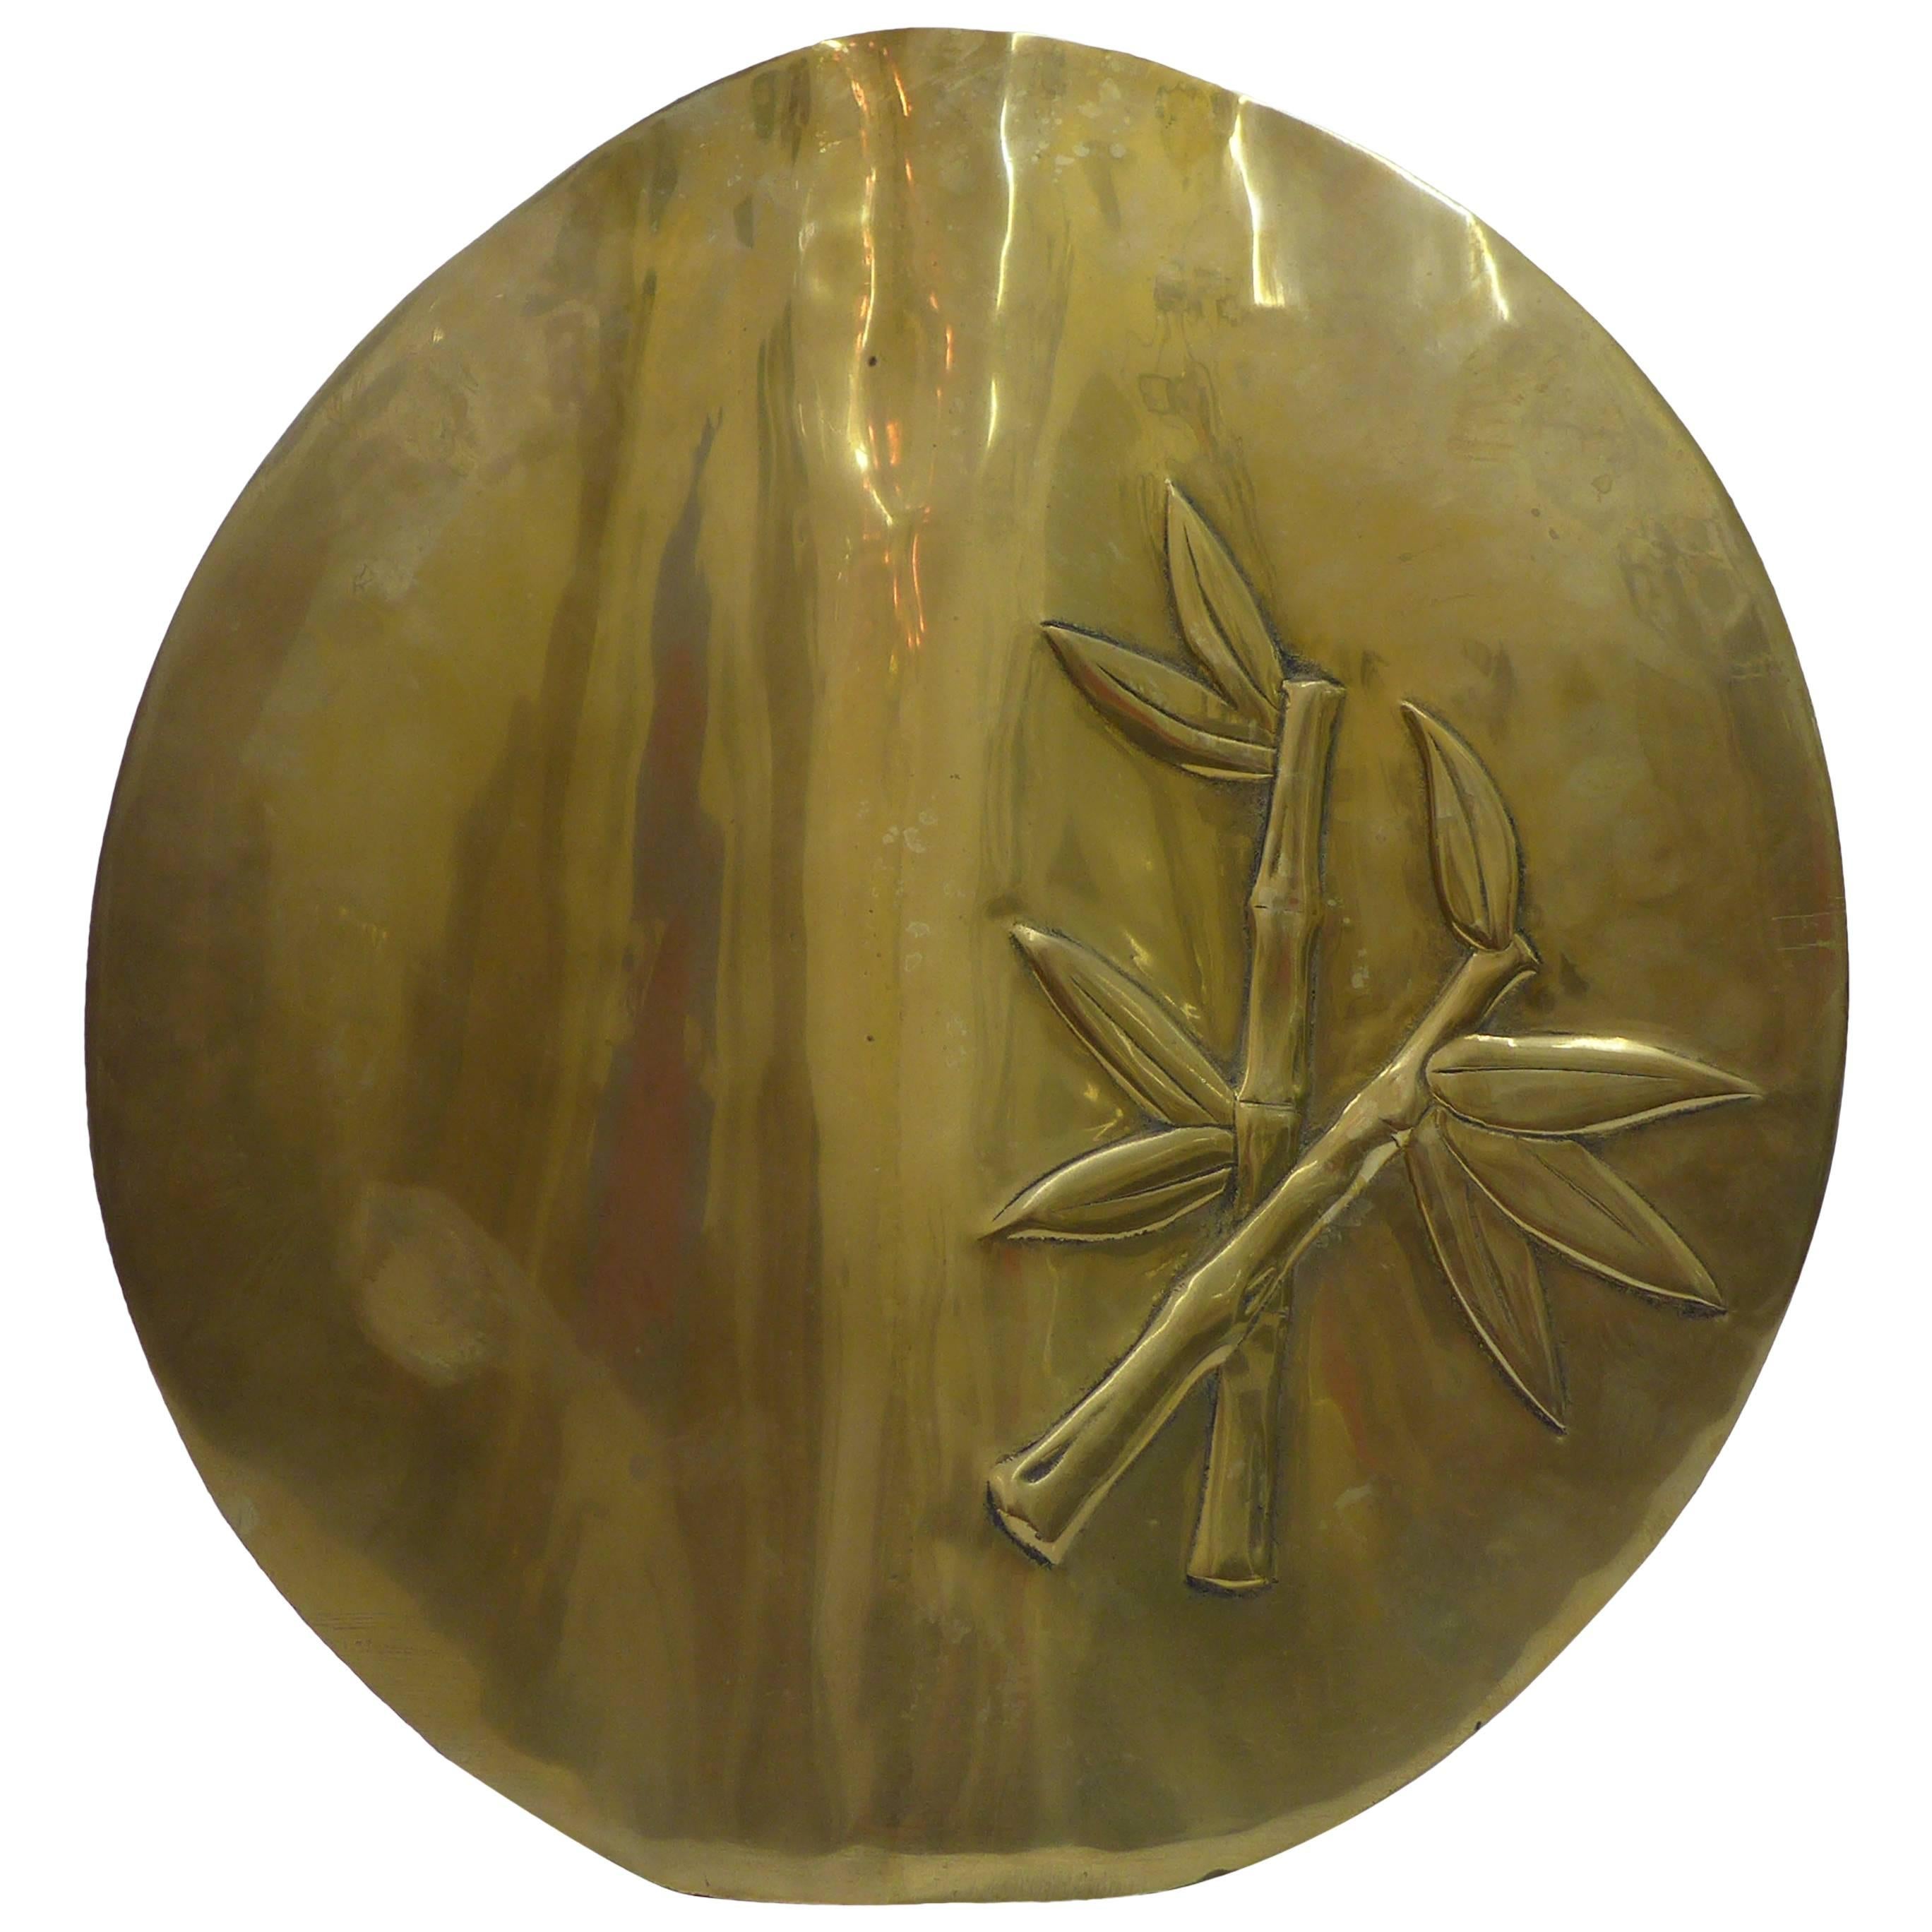 Sculptural brass vase with raised bamboo shoot design.